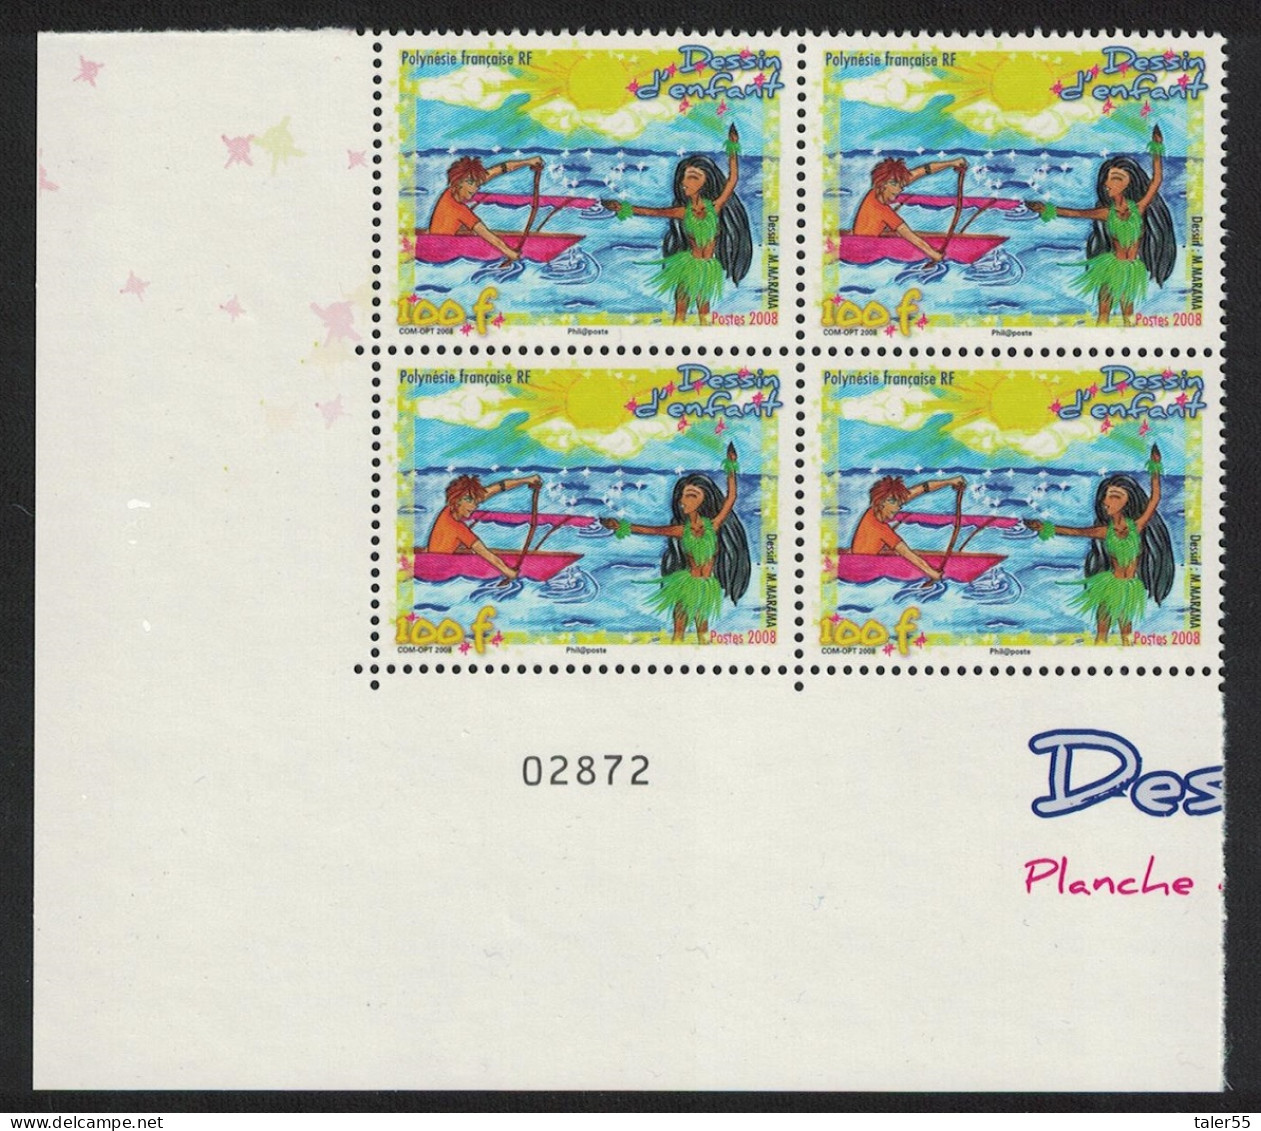 Fr. Polynesia Christmas Children's Drawings Block Of 4 Control Number 2008 MNH SG#1109 MI#1061 - Ungebraucht